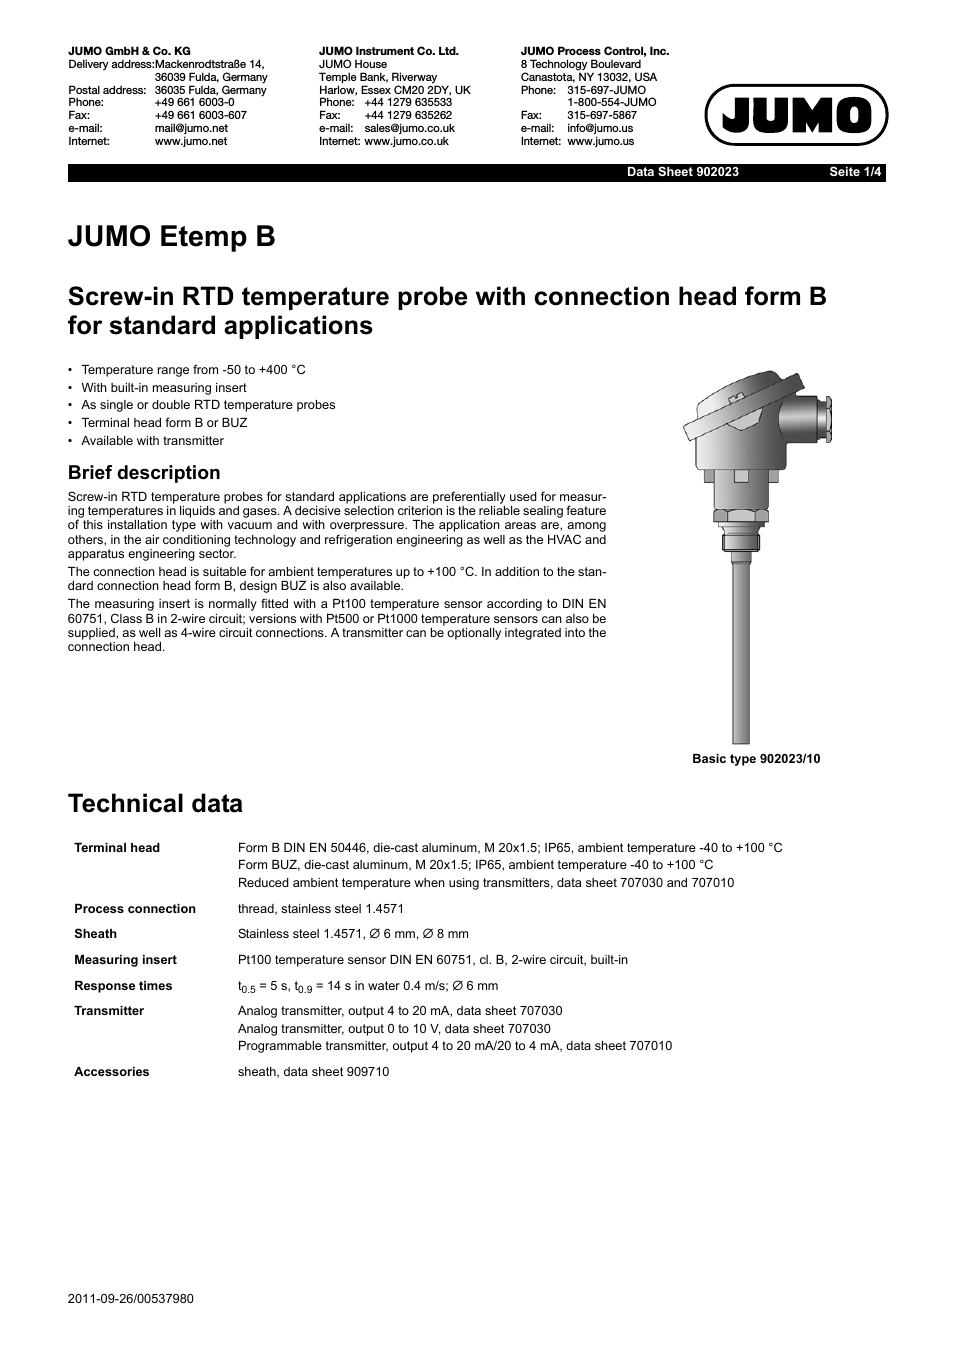 902023 Etemp B, Screw-In RTD Temperature Probe with Form B Terminal Head for Standard Applications Data Sheet